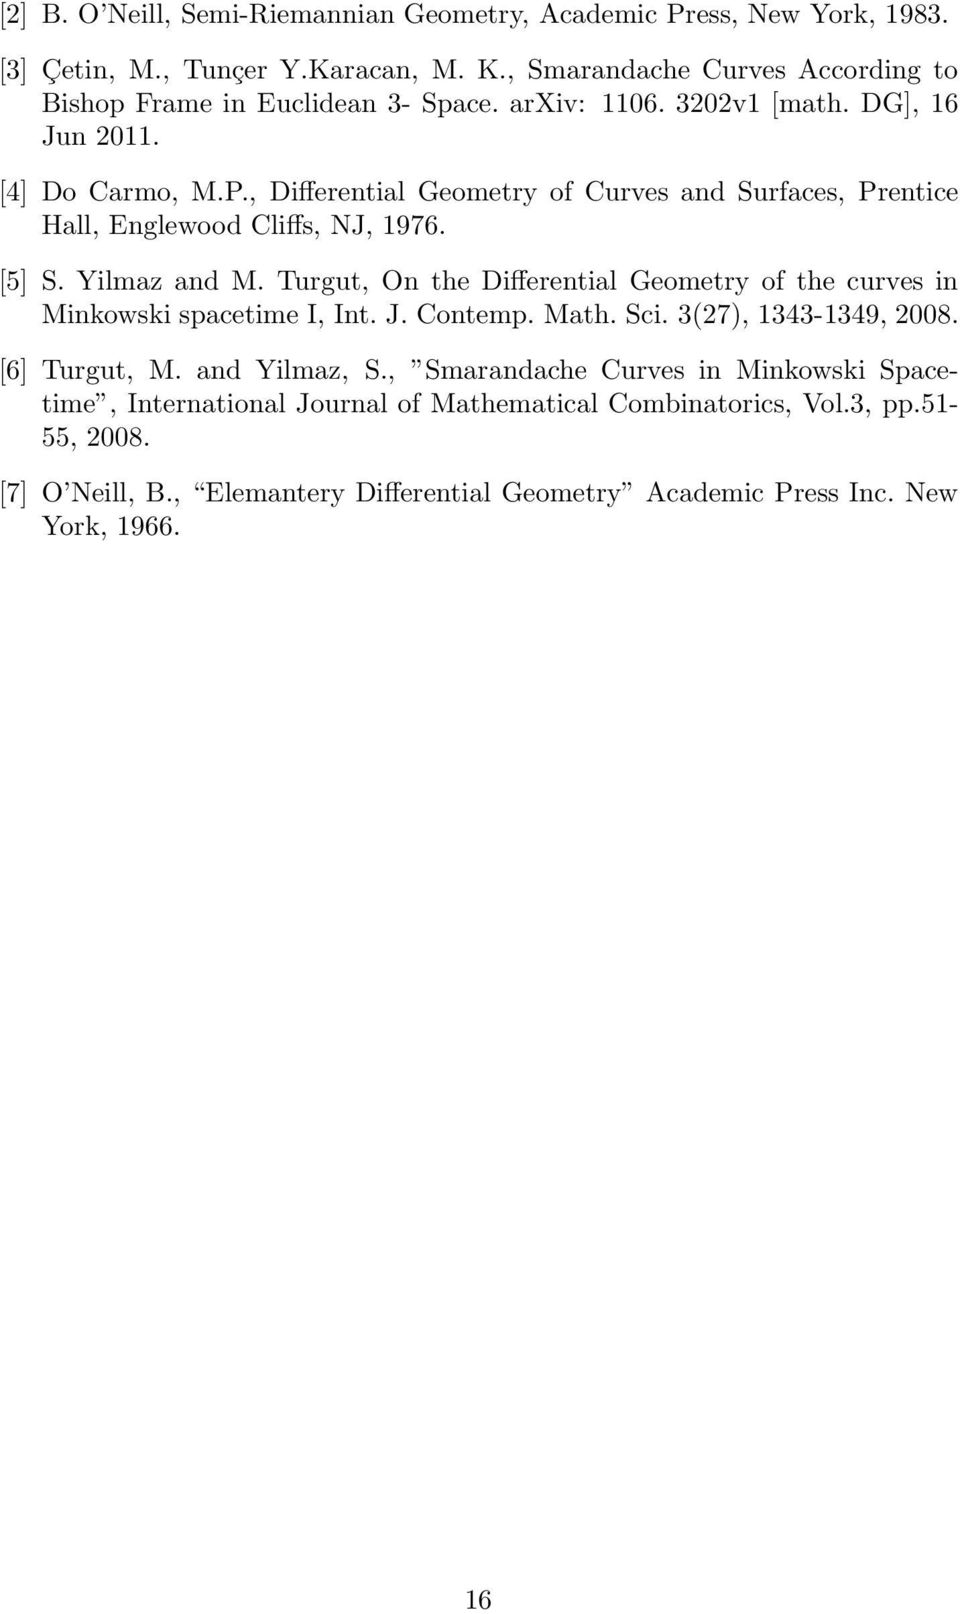 , Differential Geometry of Curves Surfaces, Prentice Hall, Englewood Cliffs, NJ, 1976. [5] S. Yilmaz M.